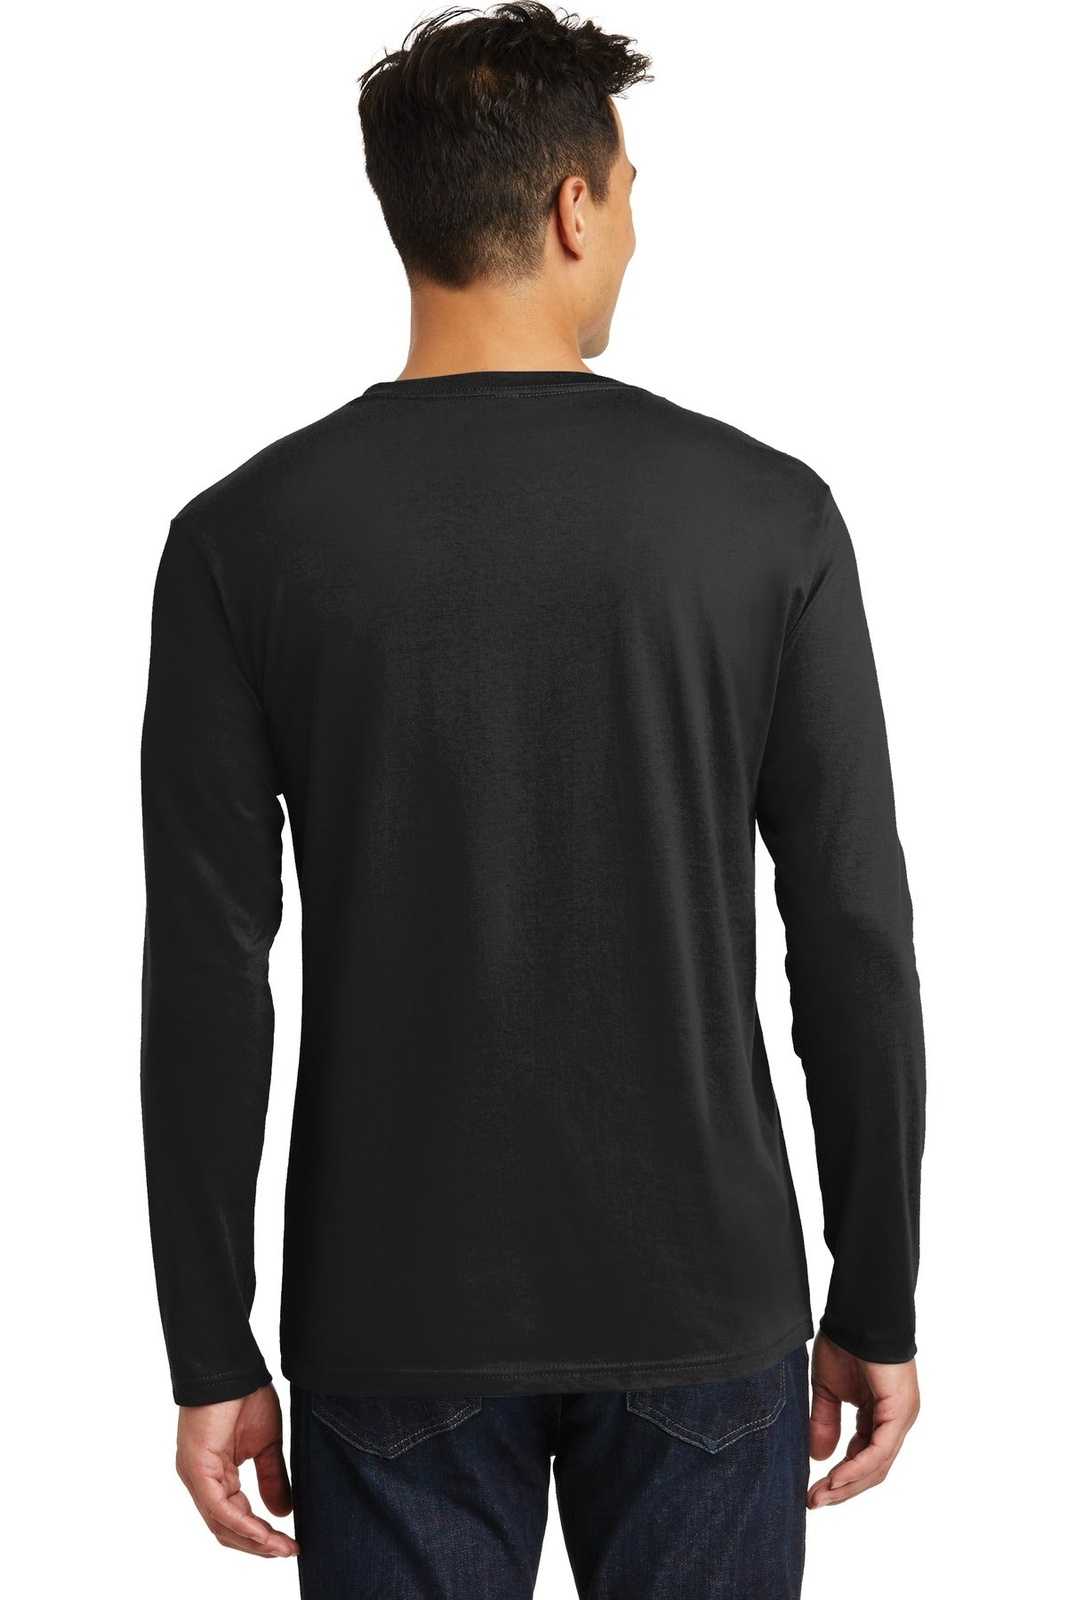 District DT105 Perfect Weight Long Sleeve Tee - Jet Black - HIT a Double - 2